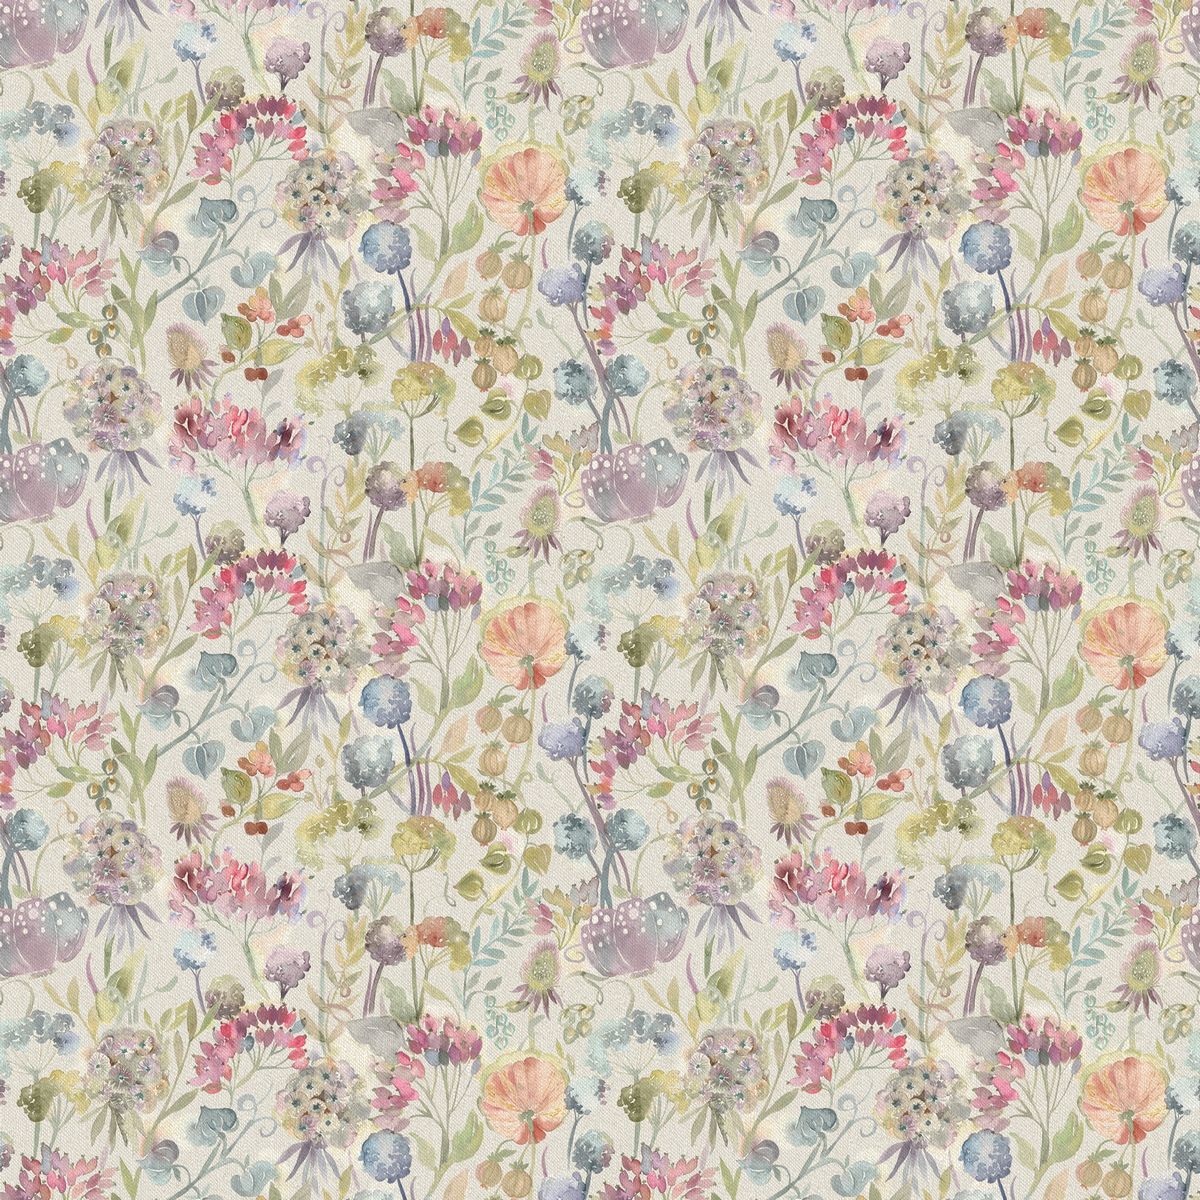 Patrice Loganberry Linen Fabric by Voyage Maison